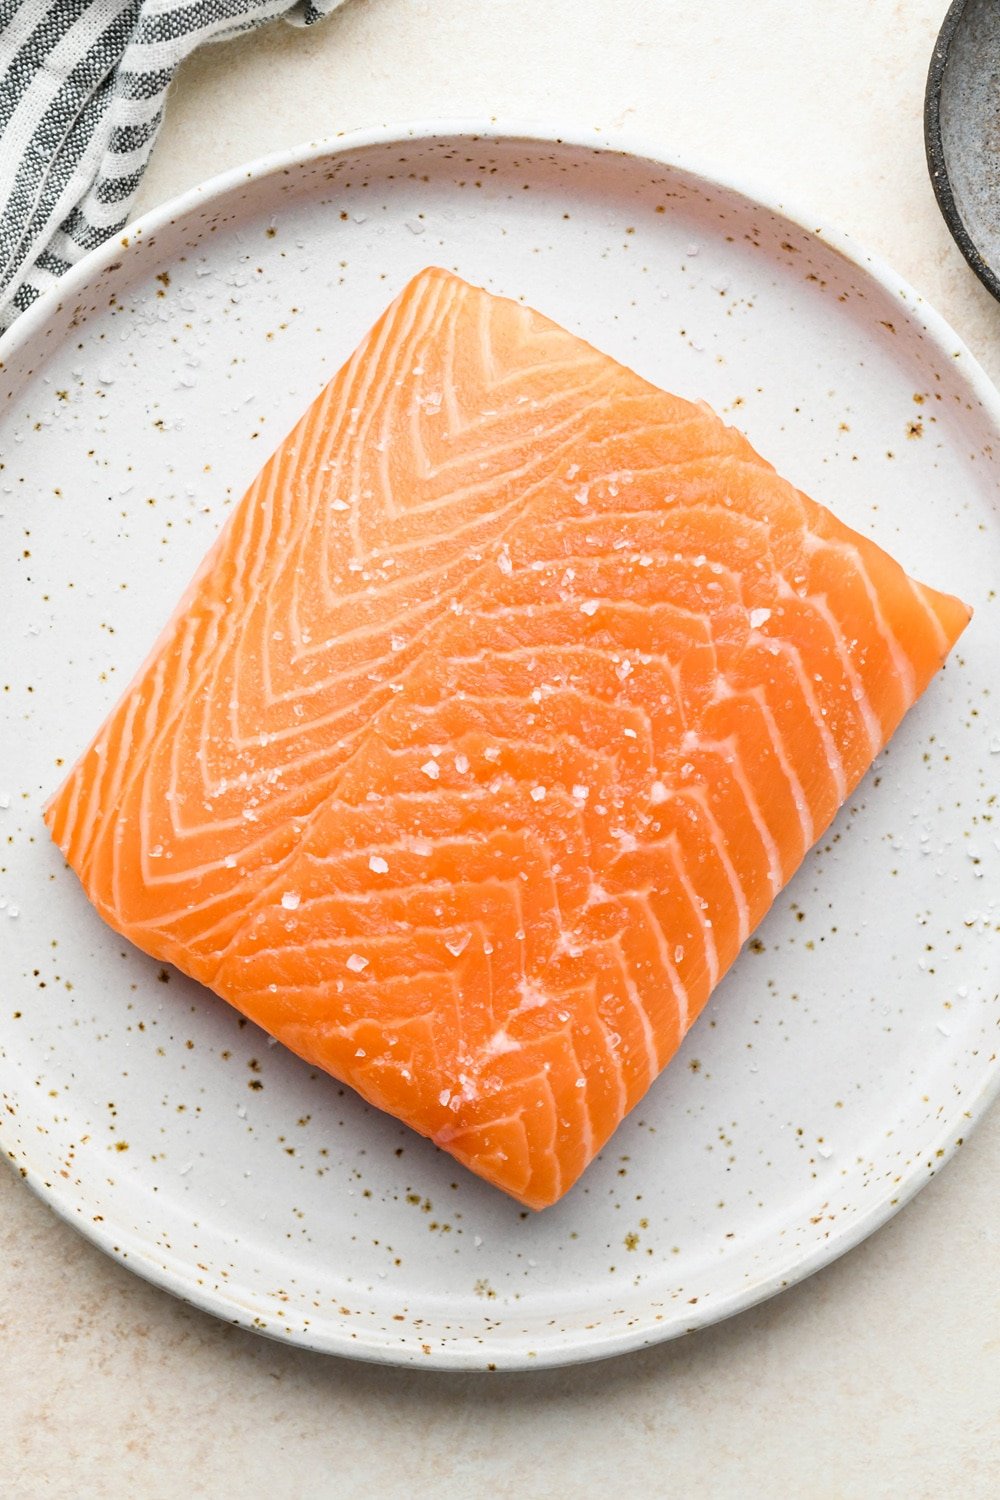 How to make garlic ginger salmon: Salmon filet patted dry on a small ceramic plate, topped with a sprinkle of kosher salt.